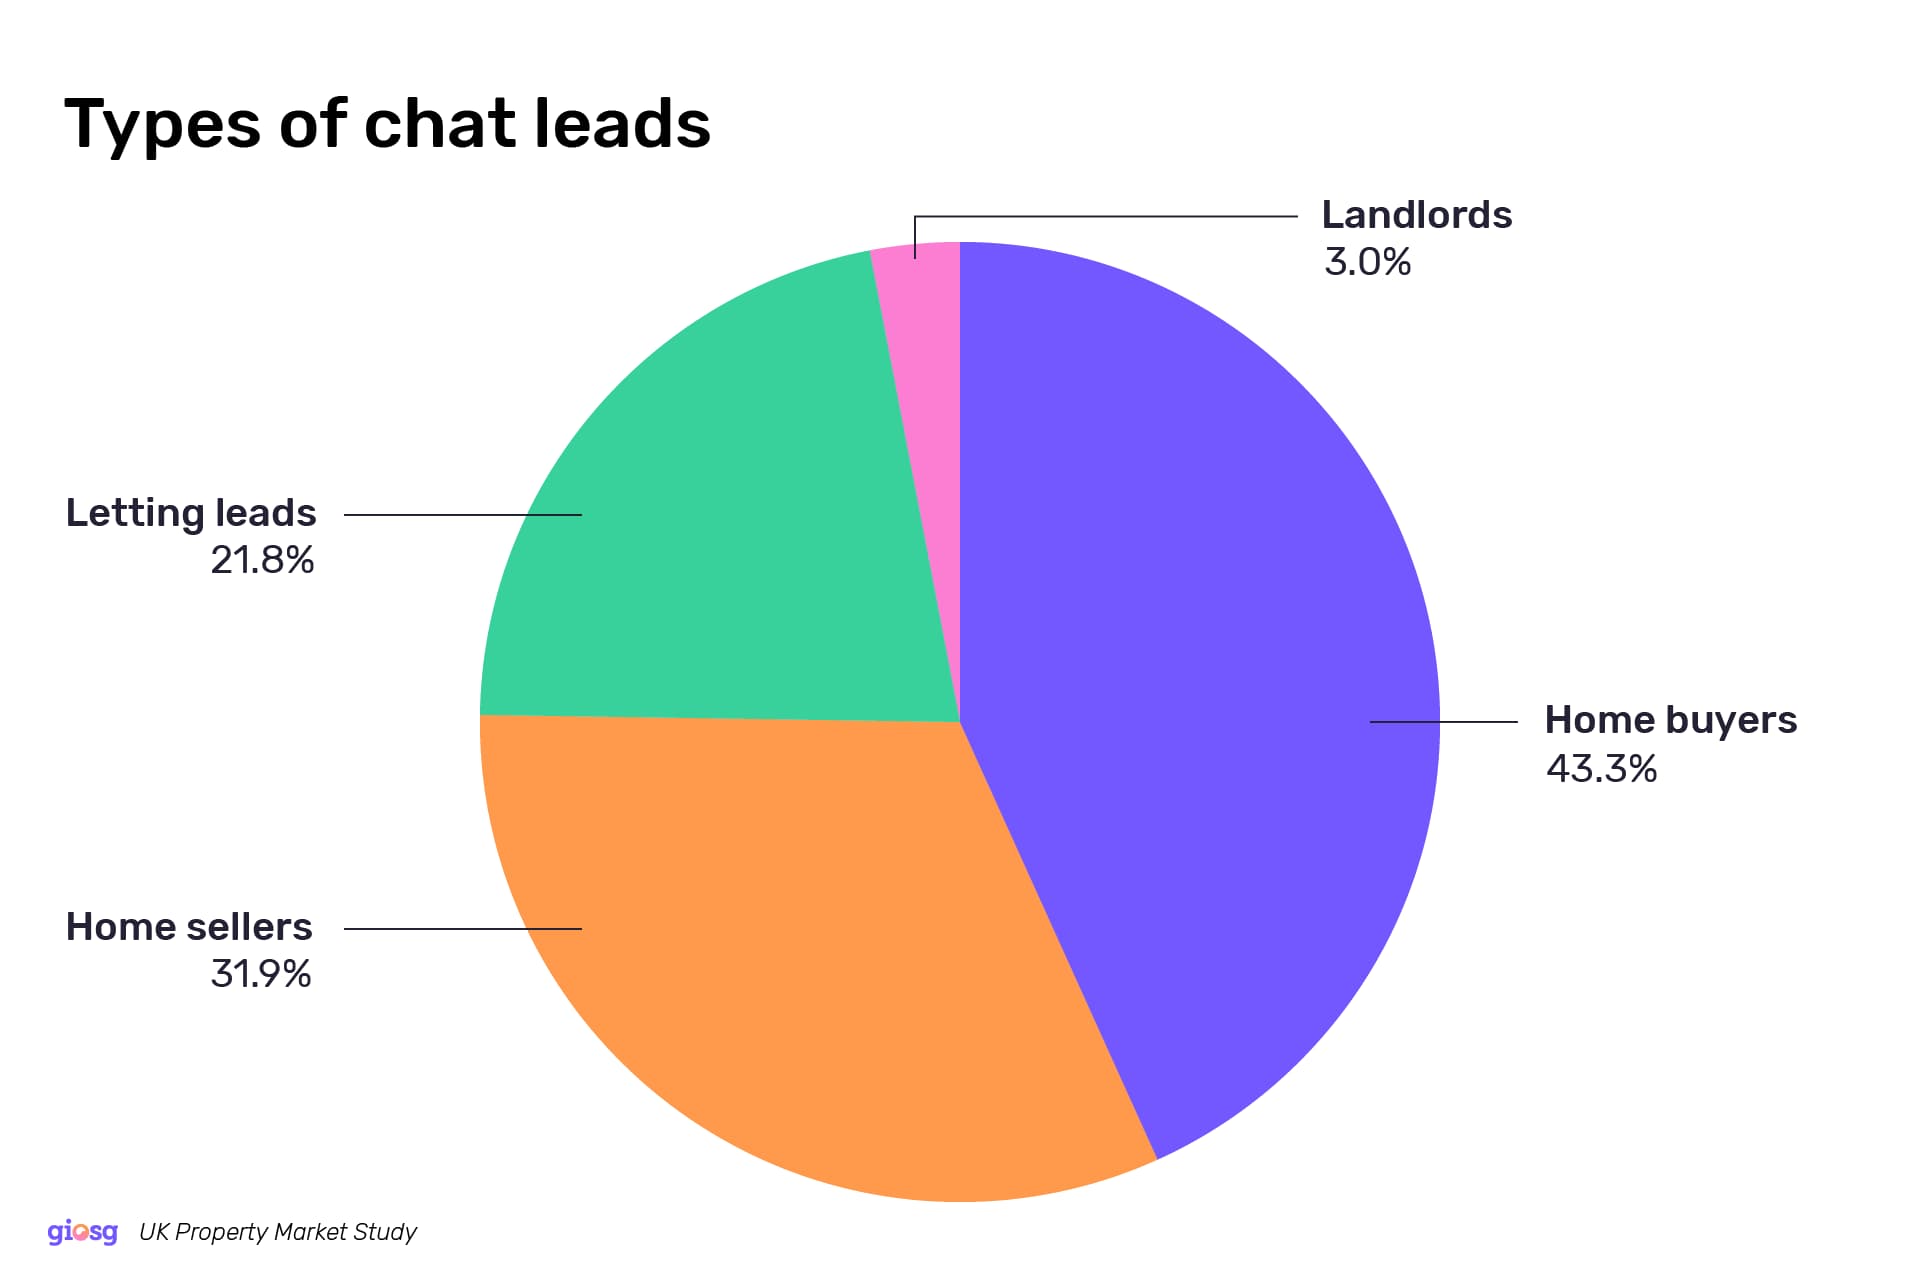 Types of chat leads on estate agent websites showing homebuyers at 43.3%